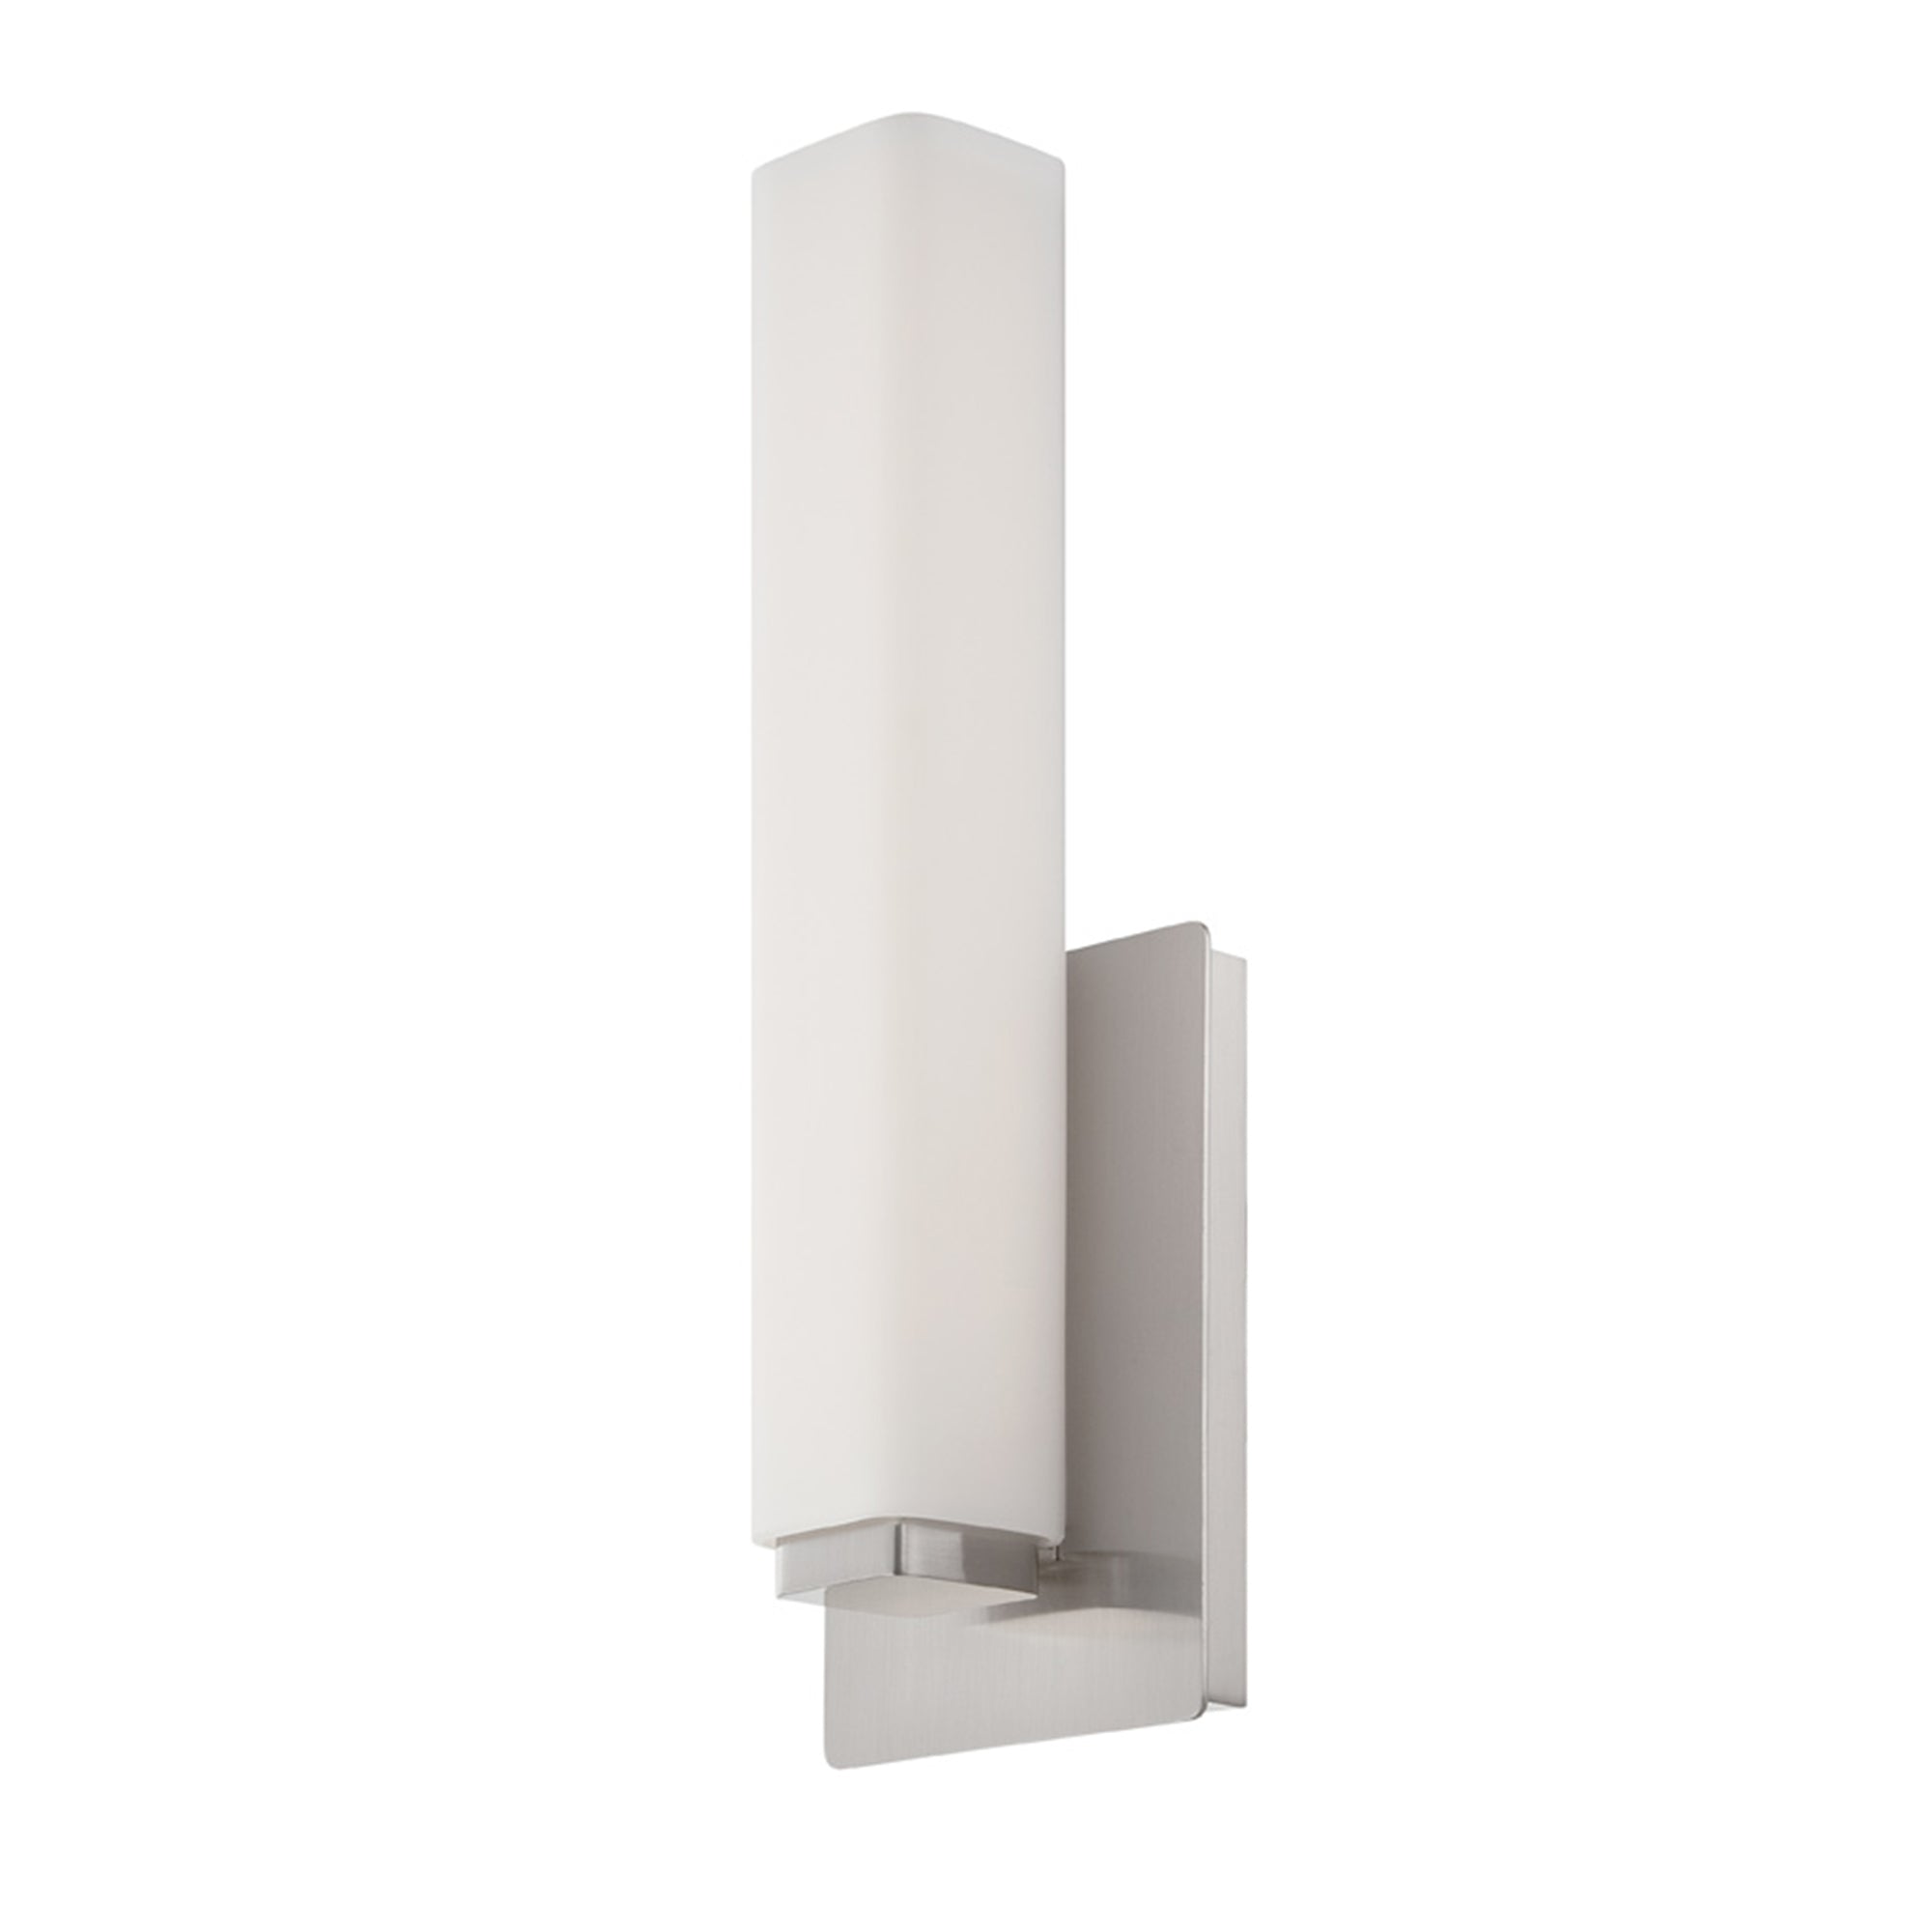 Vogue 15" LED Wall Sconce